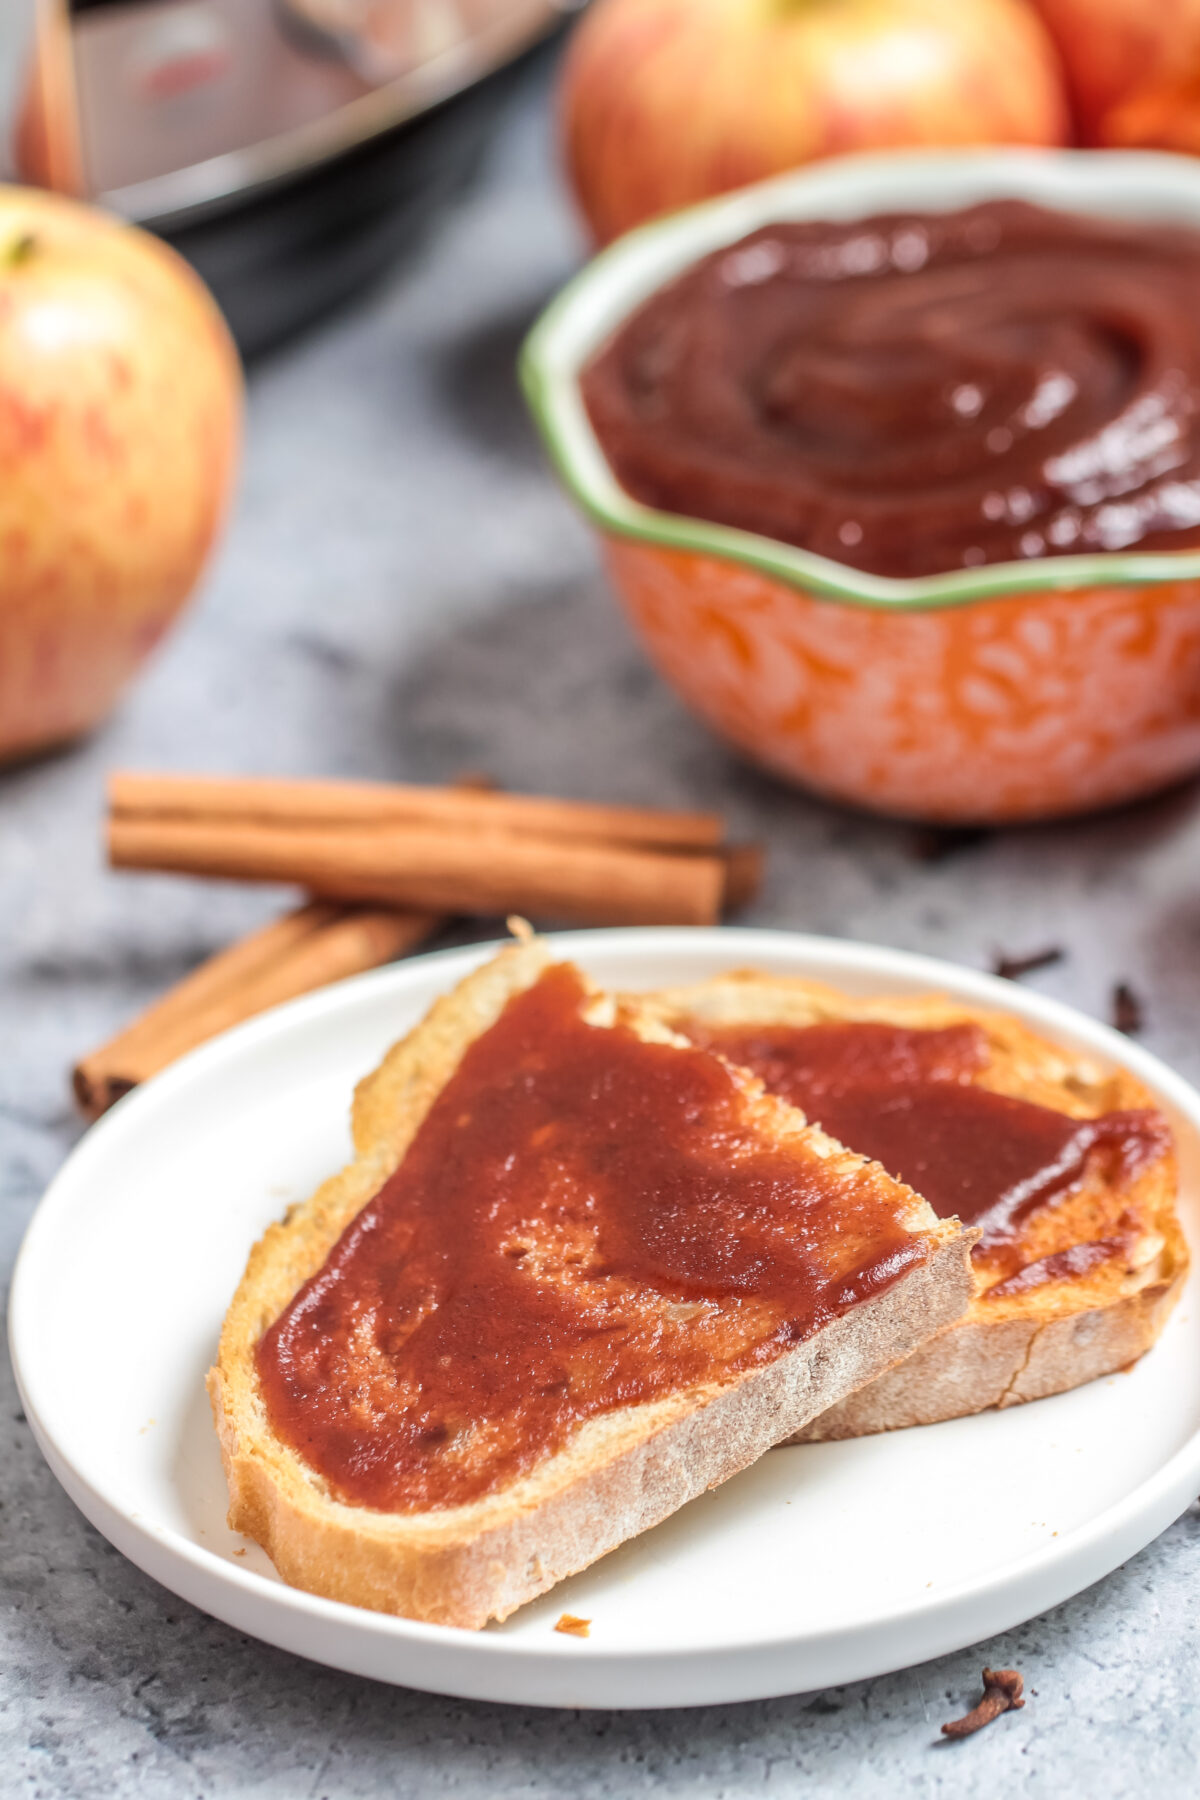 Discover a delicious and easy Instant Pot apple butter recipe and see how quickly you can have homemade apple butter spread on your toast.